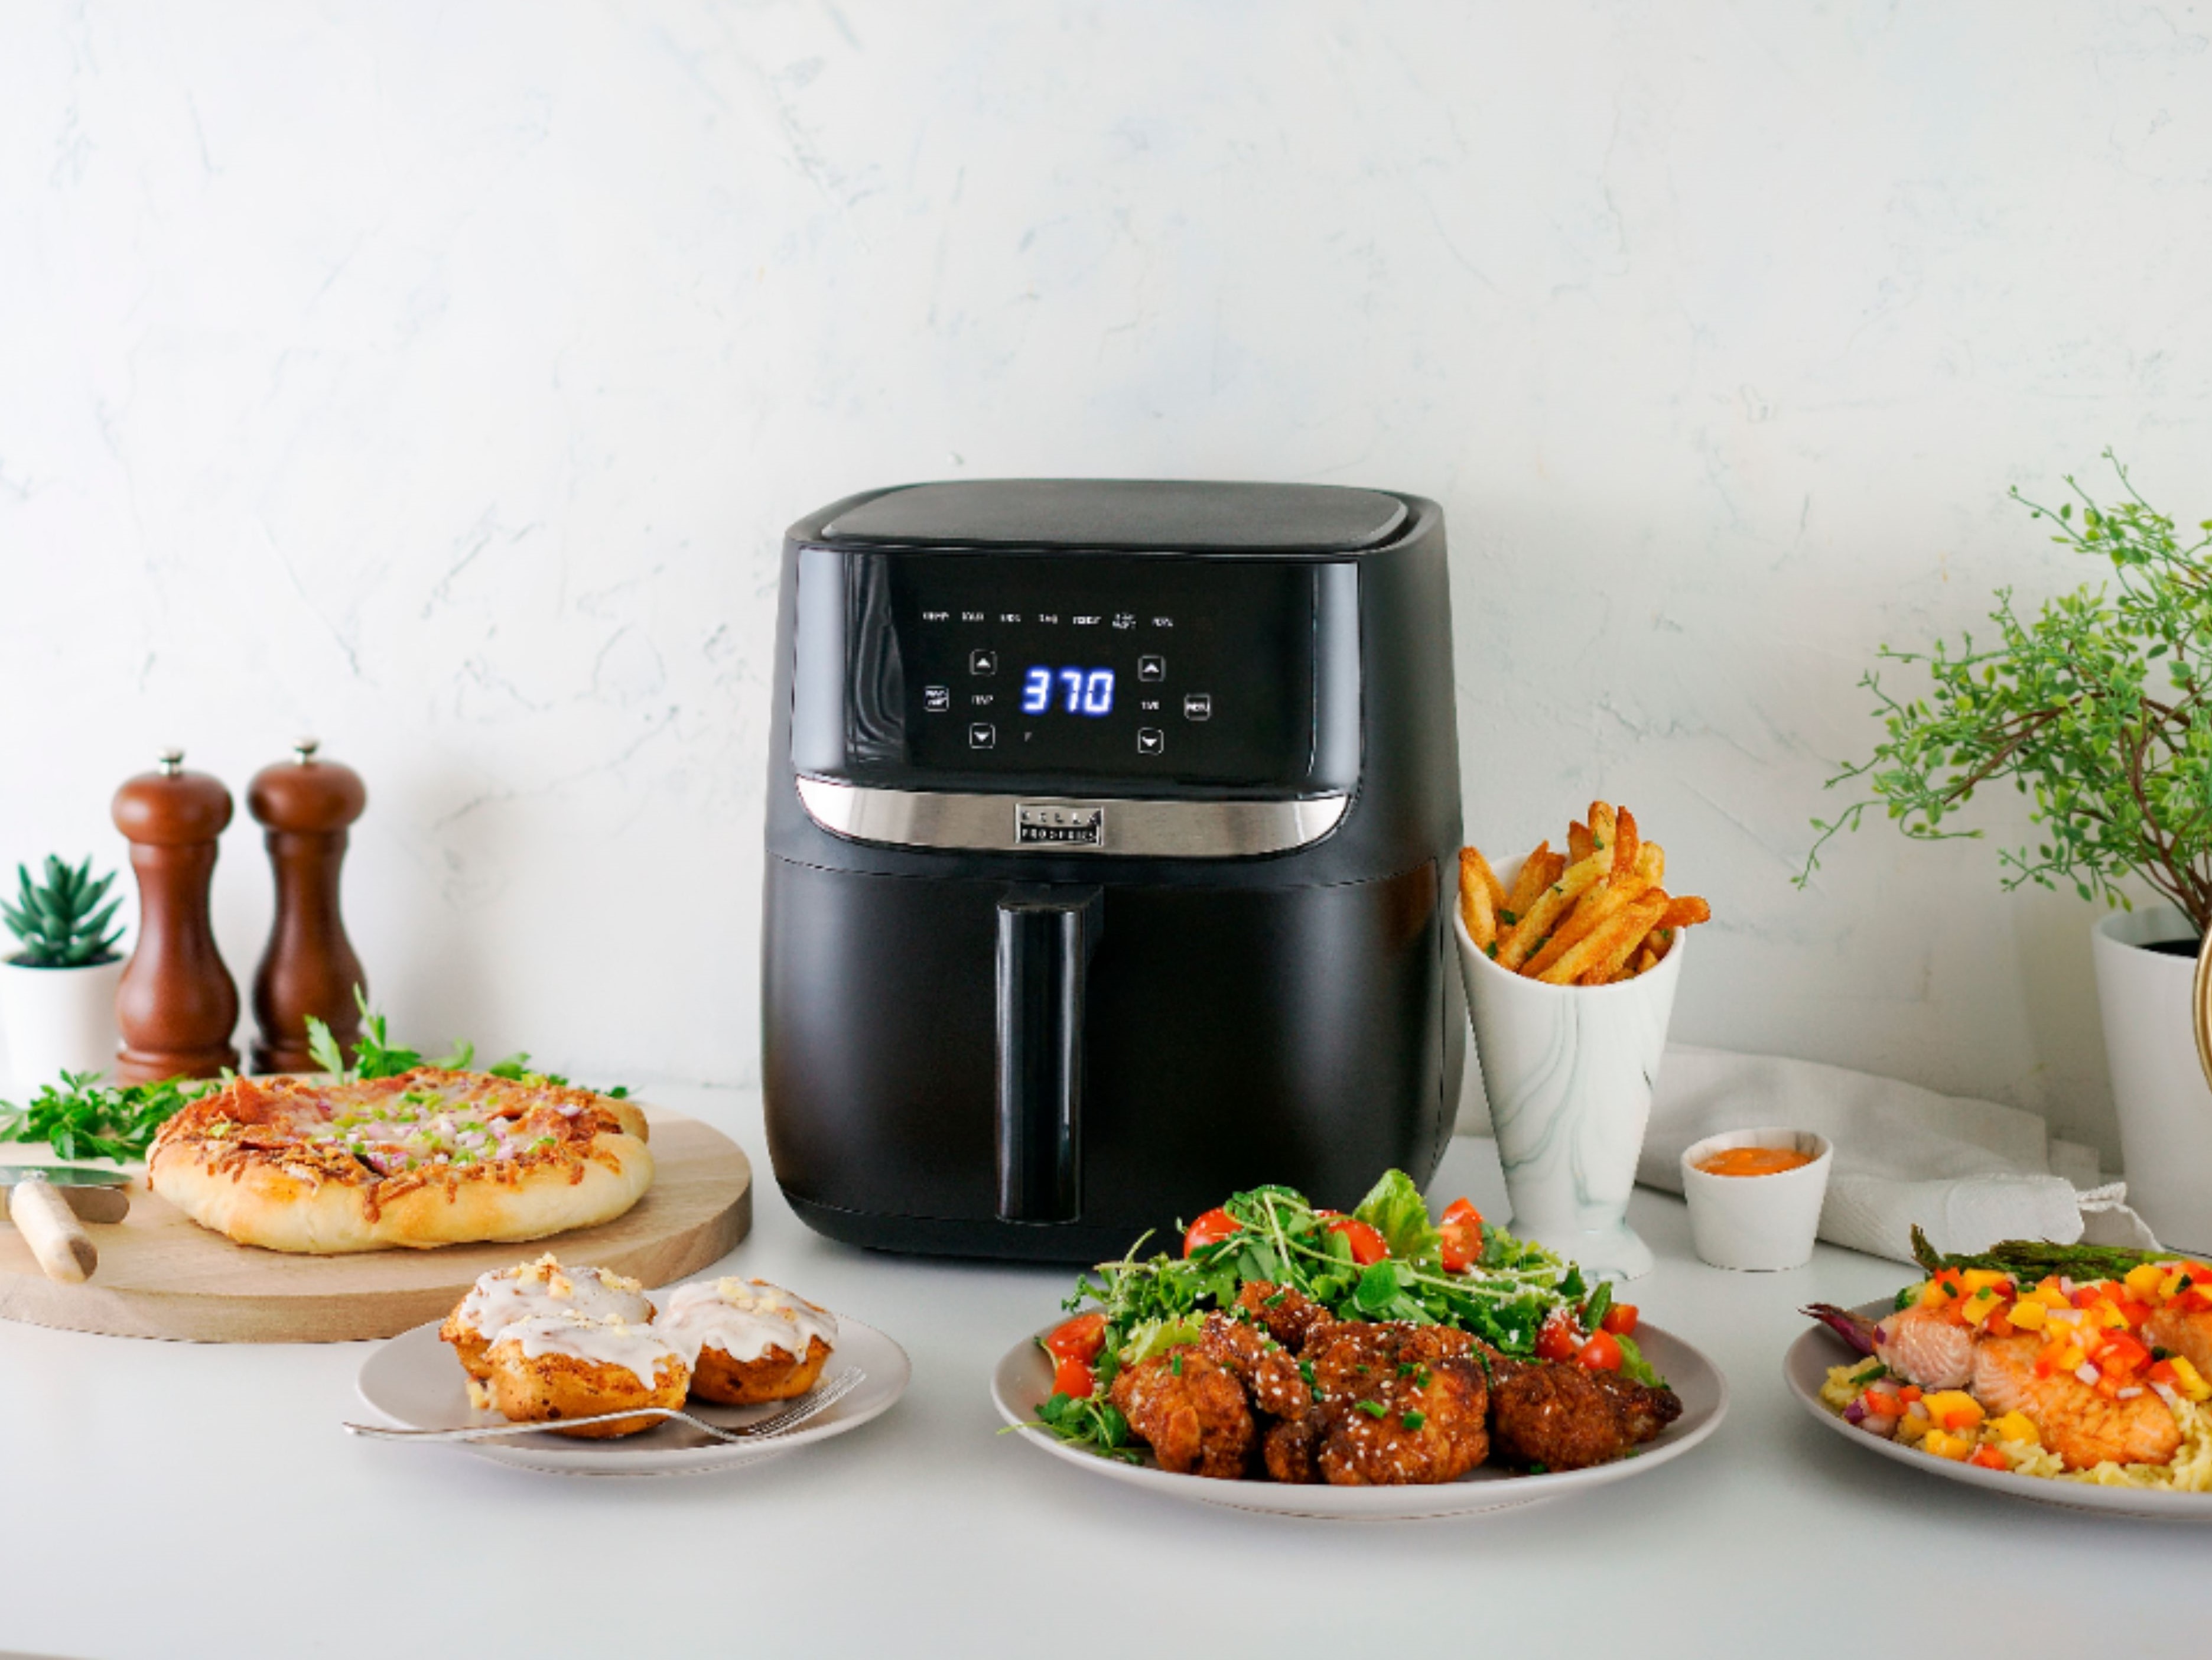 https://www.themanual.com/wp-content/uploads/sites/9/2021/08/bella-pro-series-6-qt-air-fryer-with-food.jpg?p=1